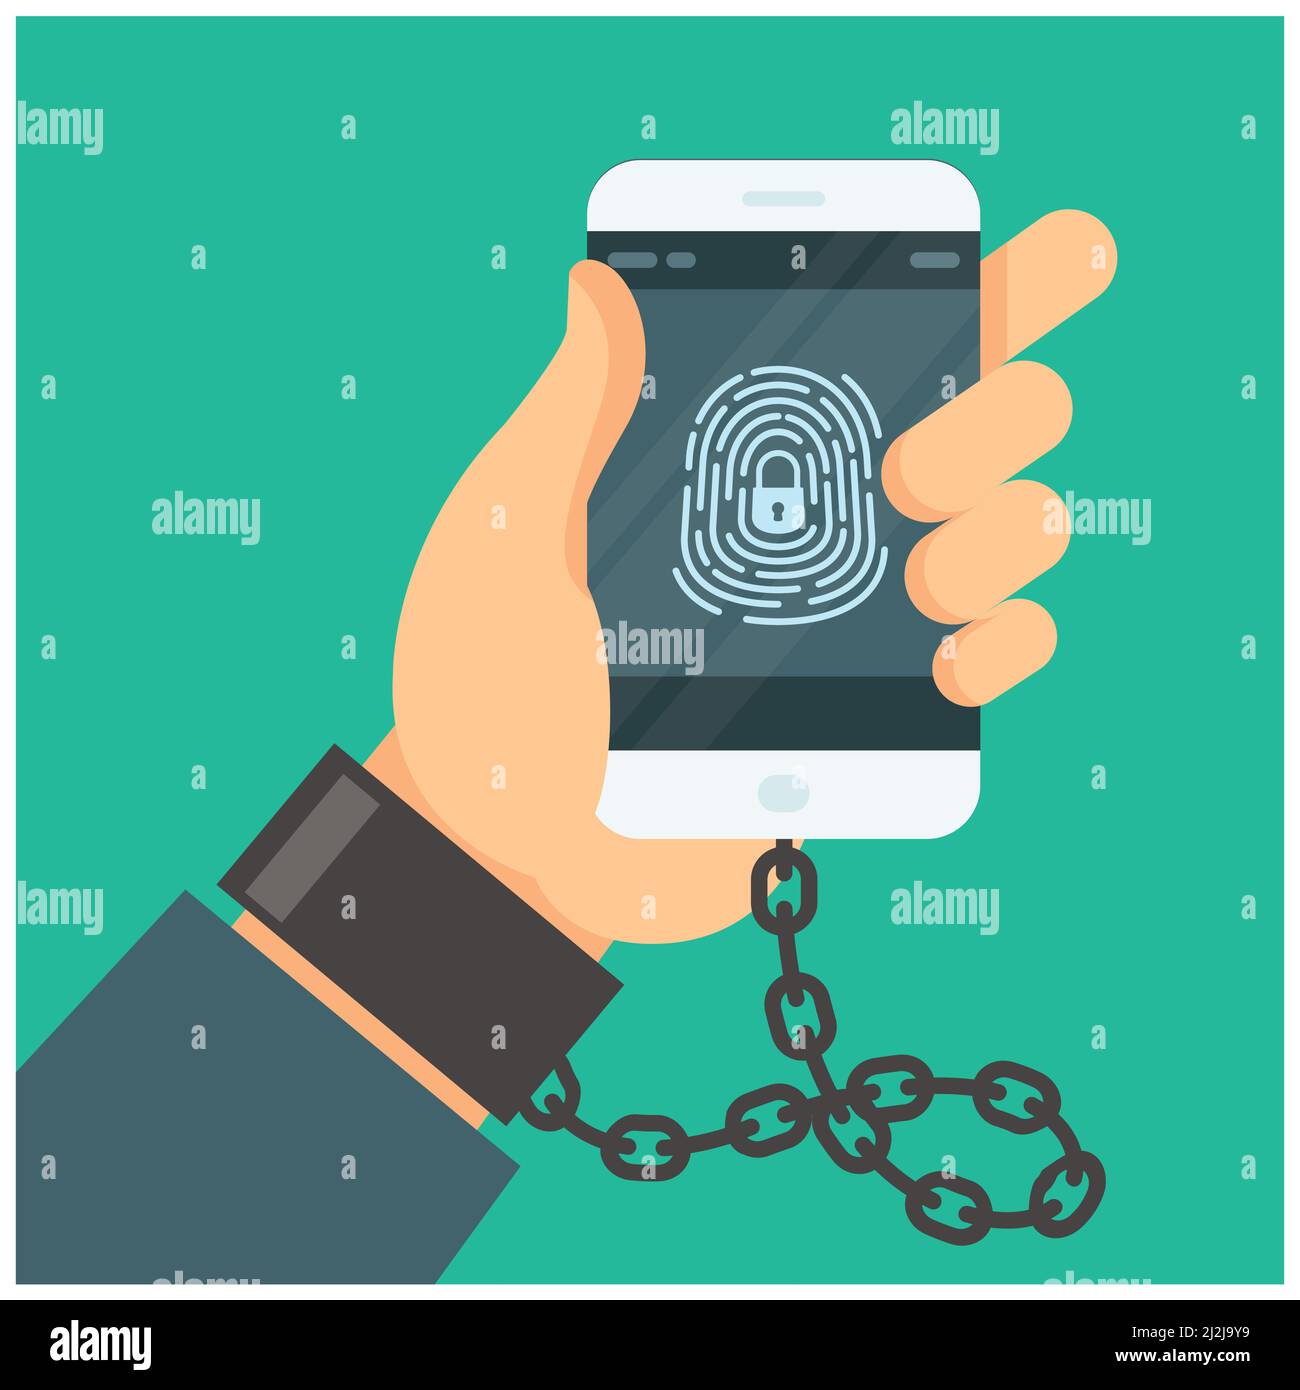 Internet addiction, hand chained with handcuff to smartphone, nomophobia concept, digital shadowing, social networks and media dependence, vector Stock Vector